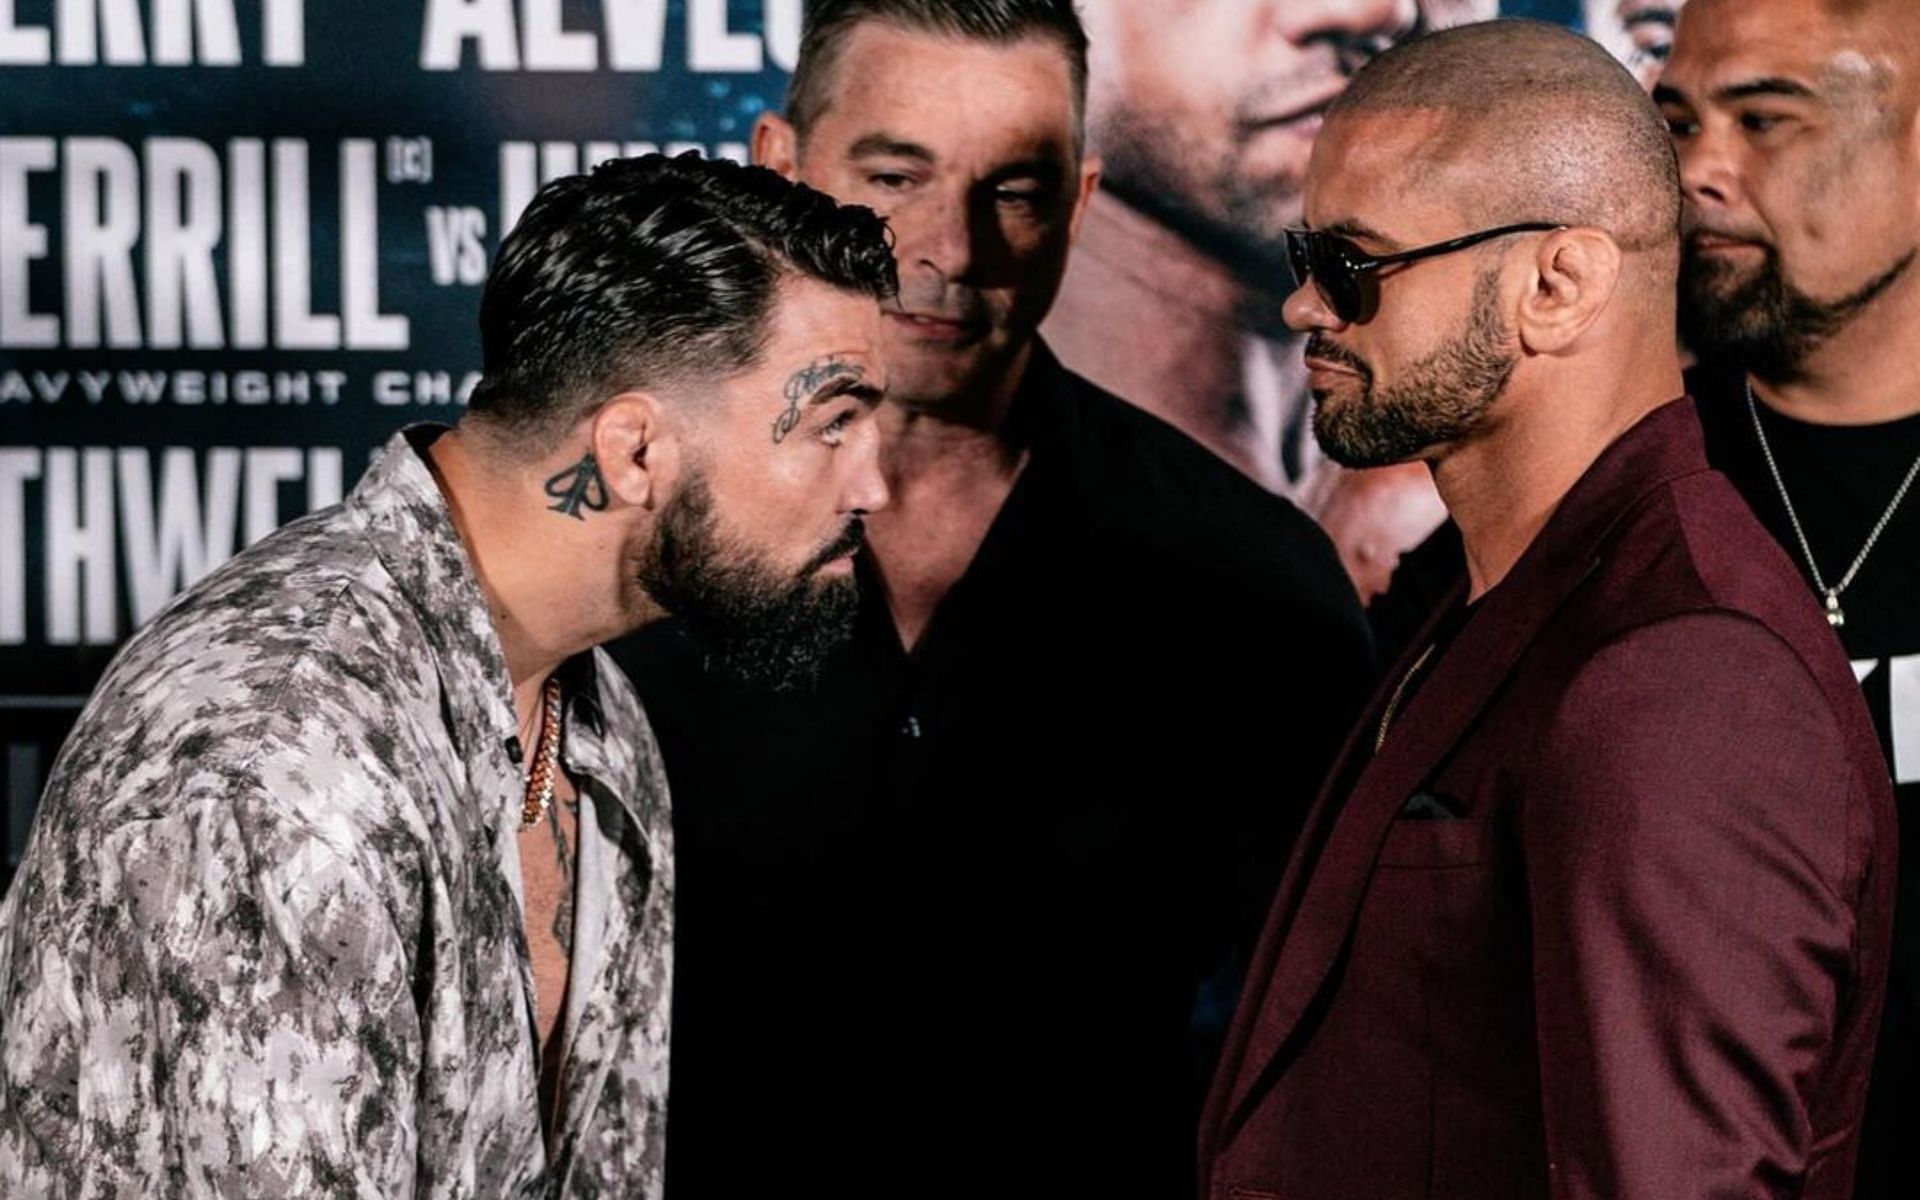 Mike Perry (left) and Thaigo Alves (right) locked horns on April 27 [Image credits: @bareknucklefc on Instagram]